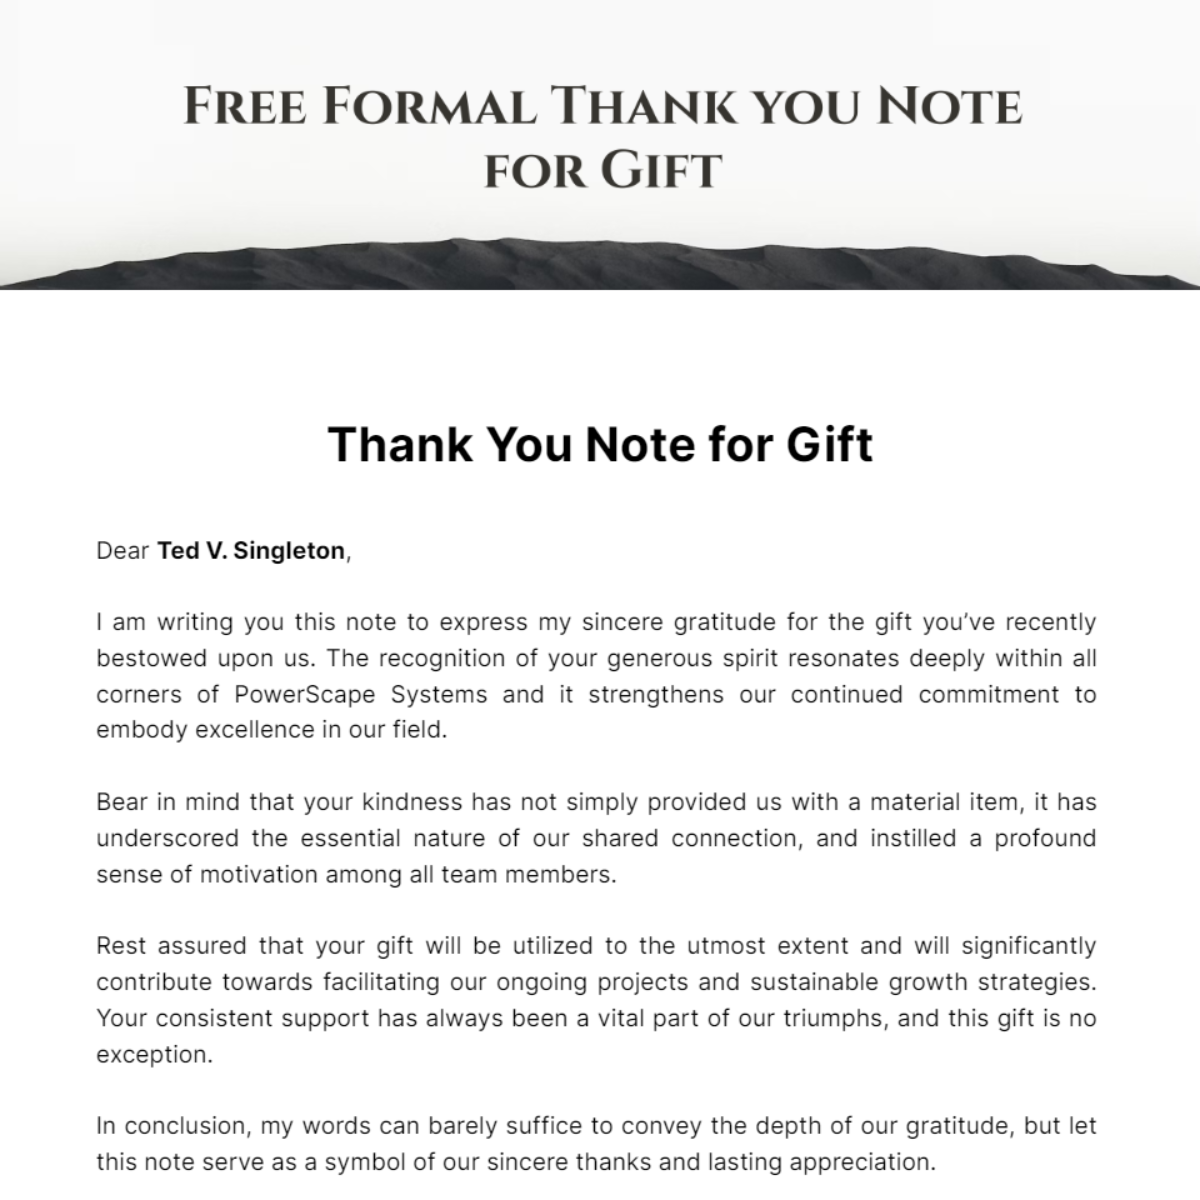 Free Formal Thank you Note for Gift Template